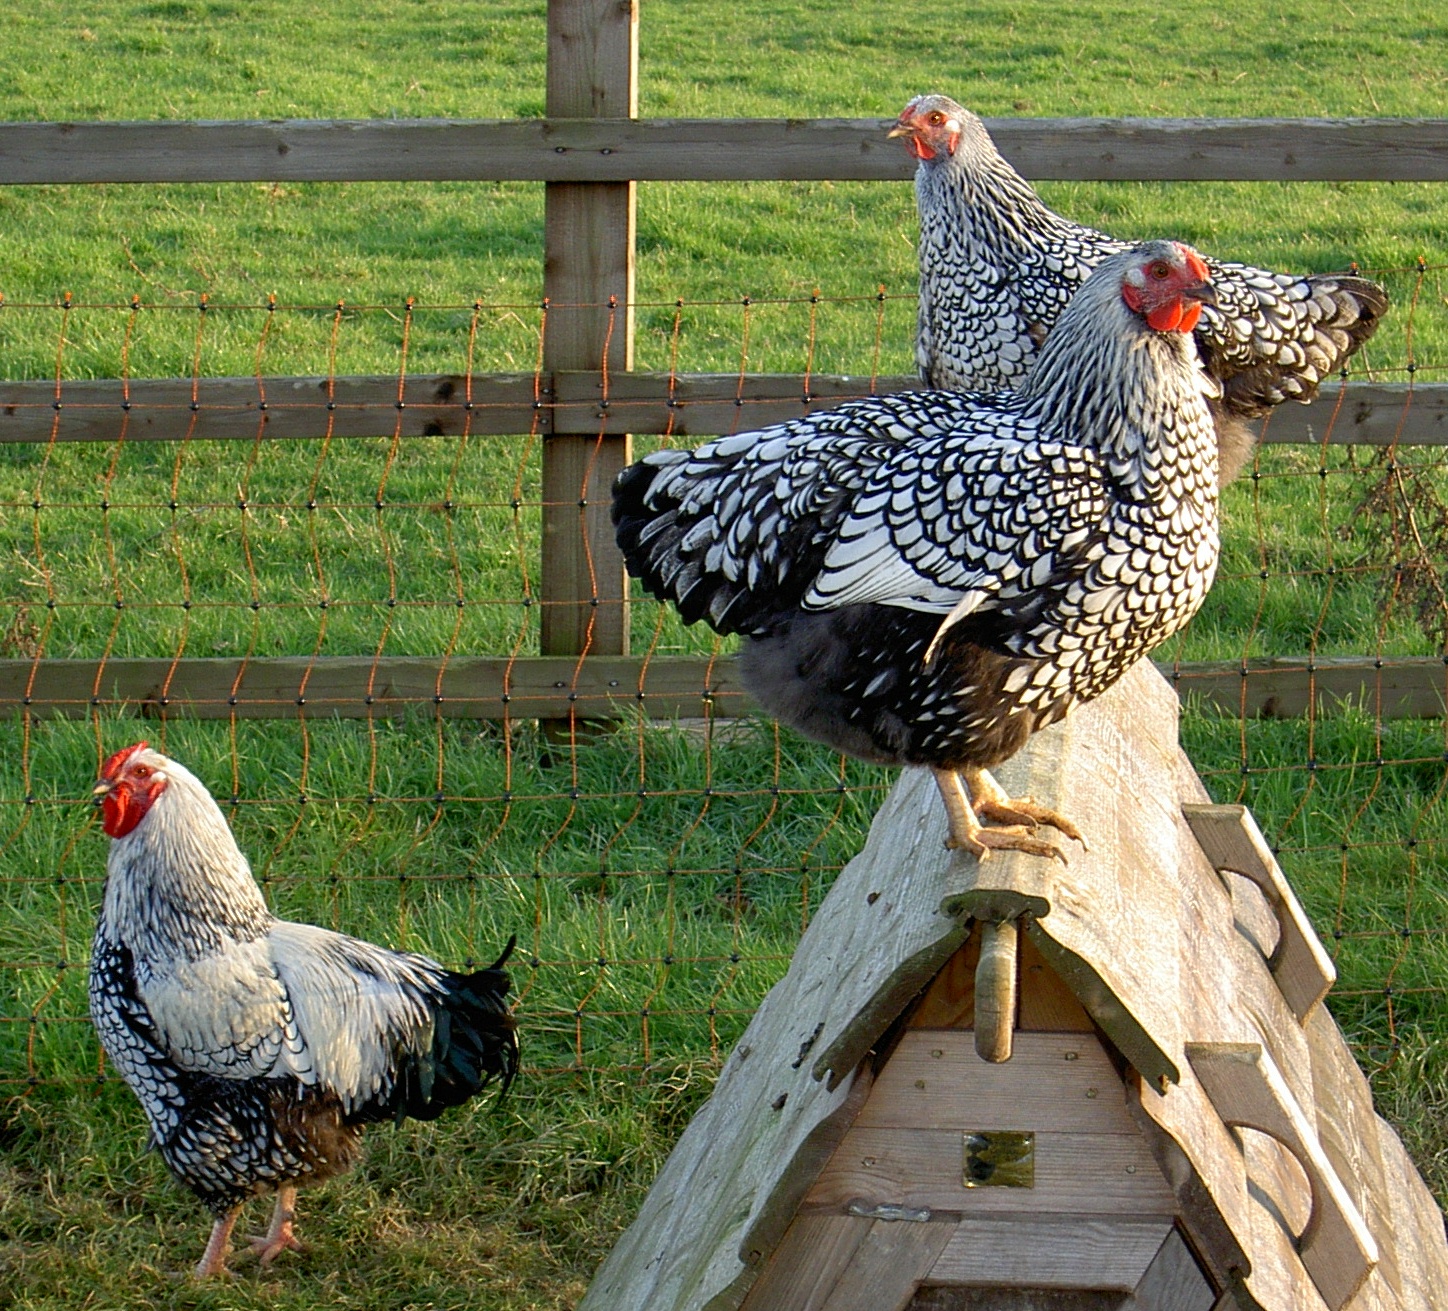 Lester's Flat: Silver Laced Wyandottes (AKA chickens) coming soon